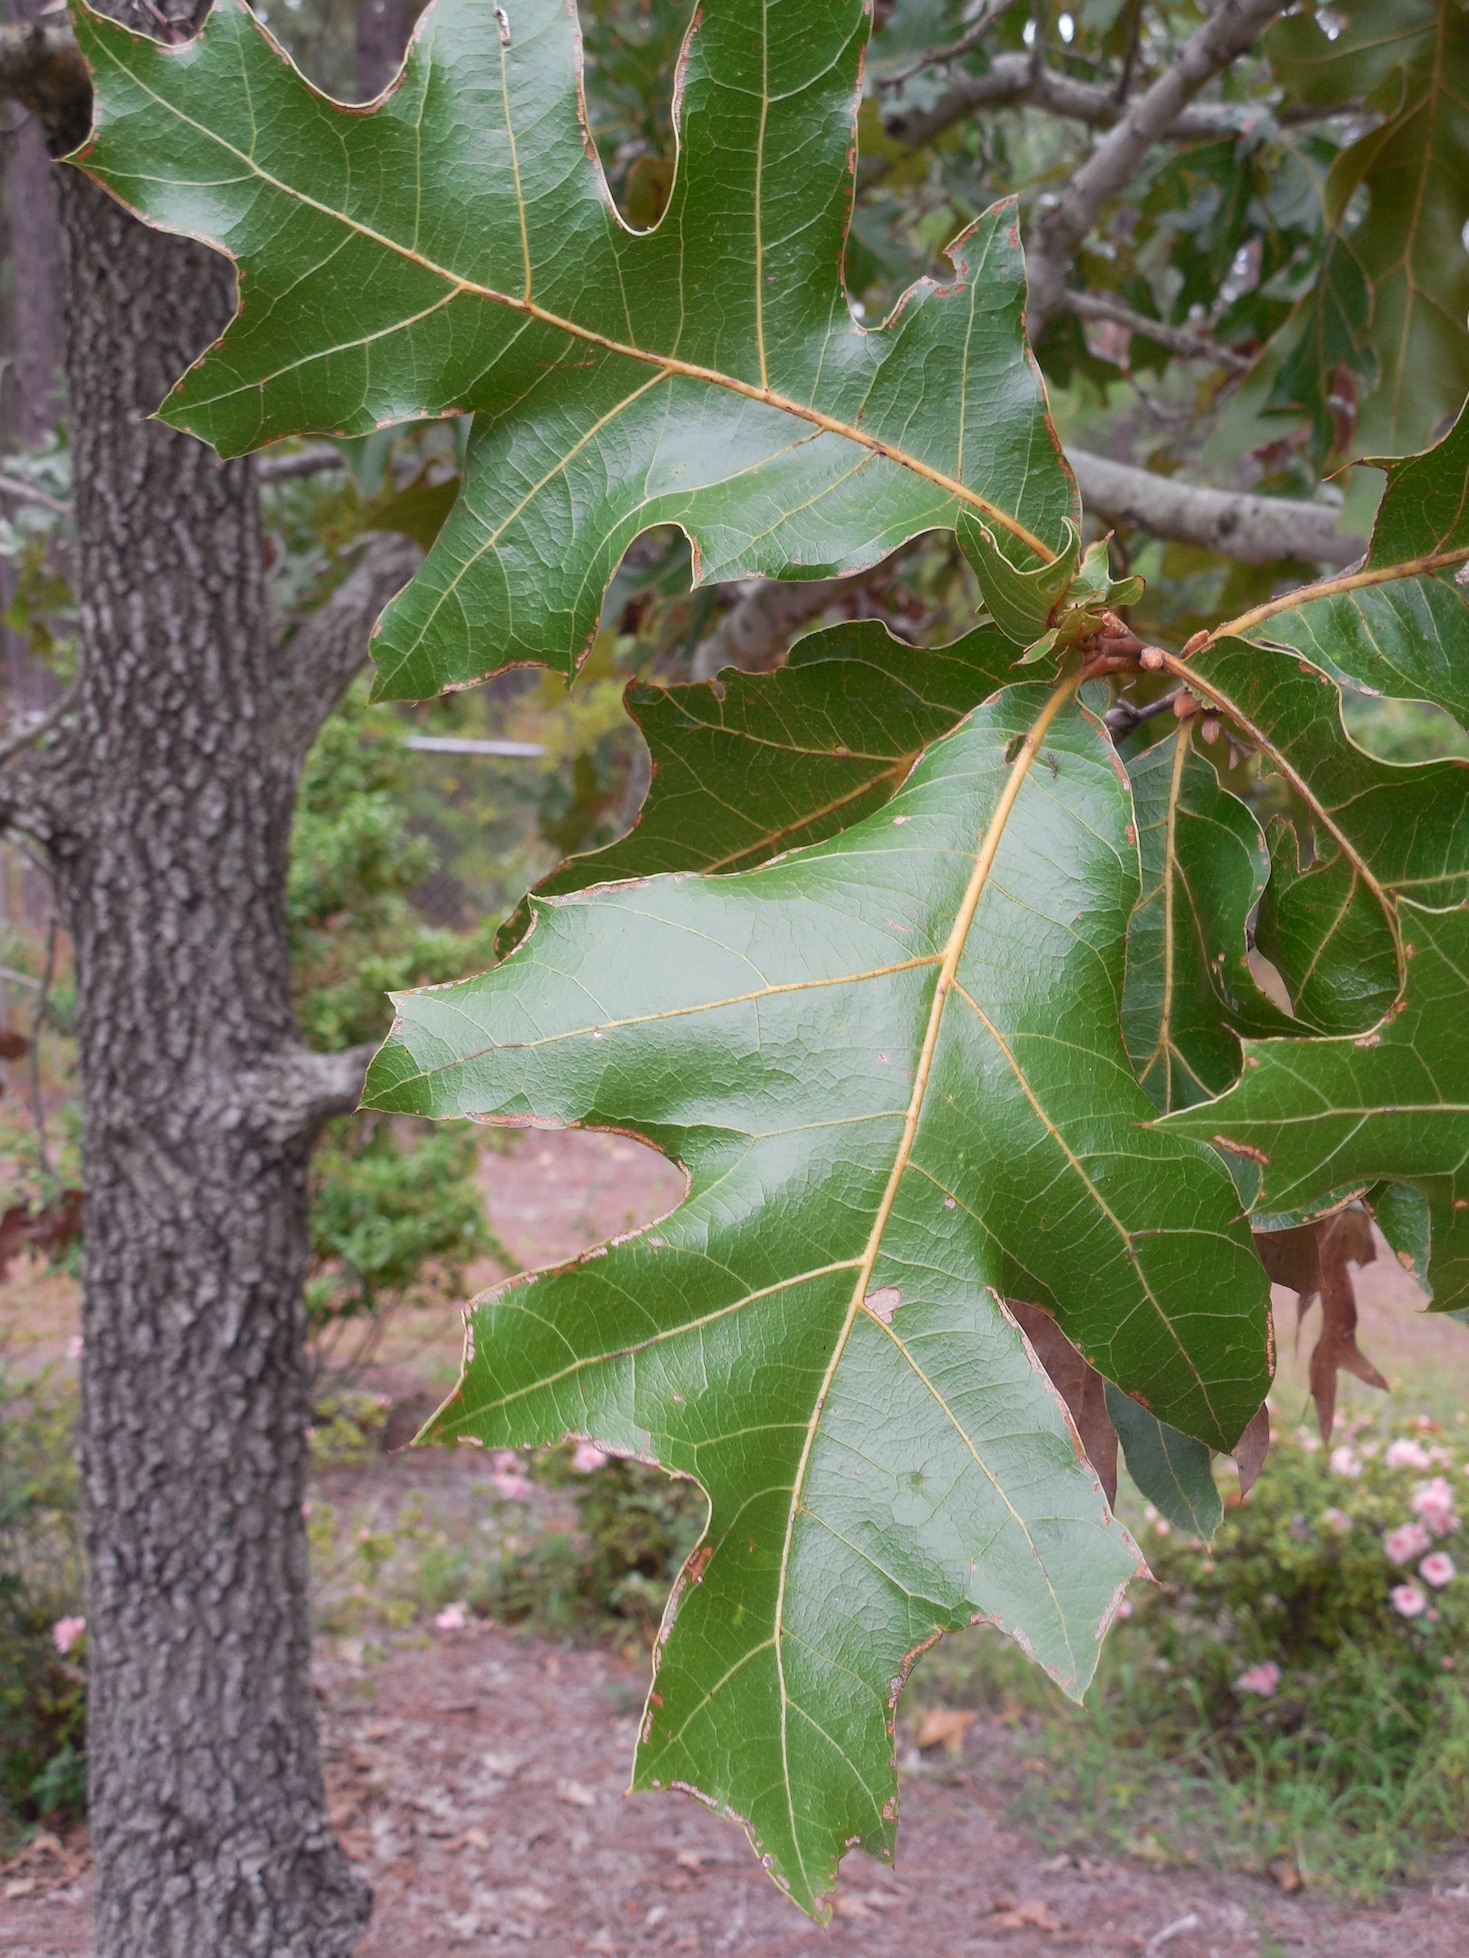 The Scientific Name is Quercus laevis [= Quercus catesbaei]. You will likely hear them called Turkey Oak. This picture shows the  of Quercus laevis [= Quercus catesbaei]